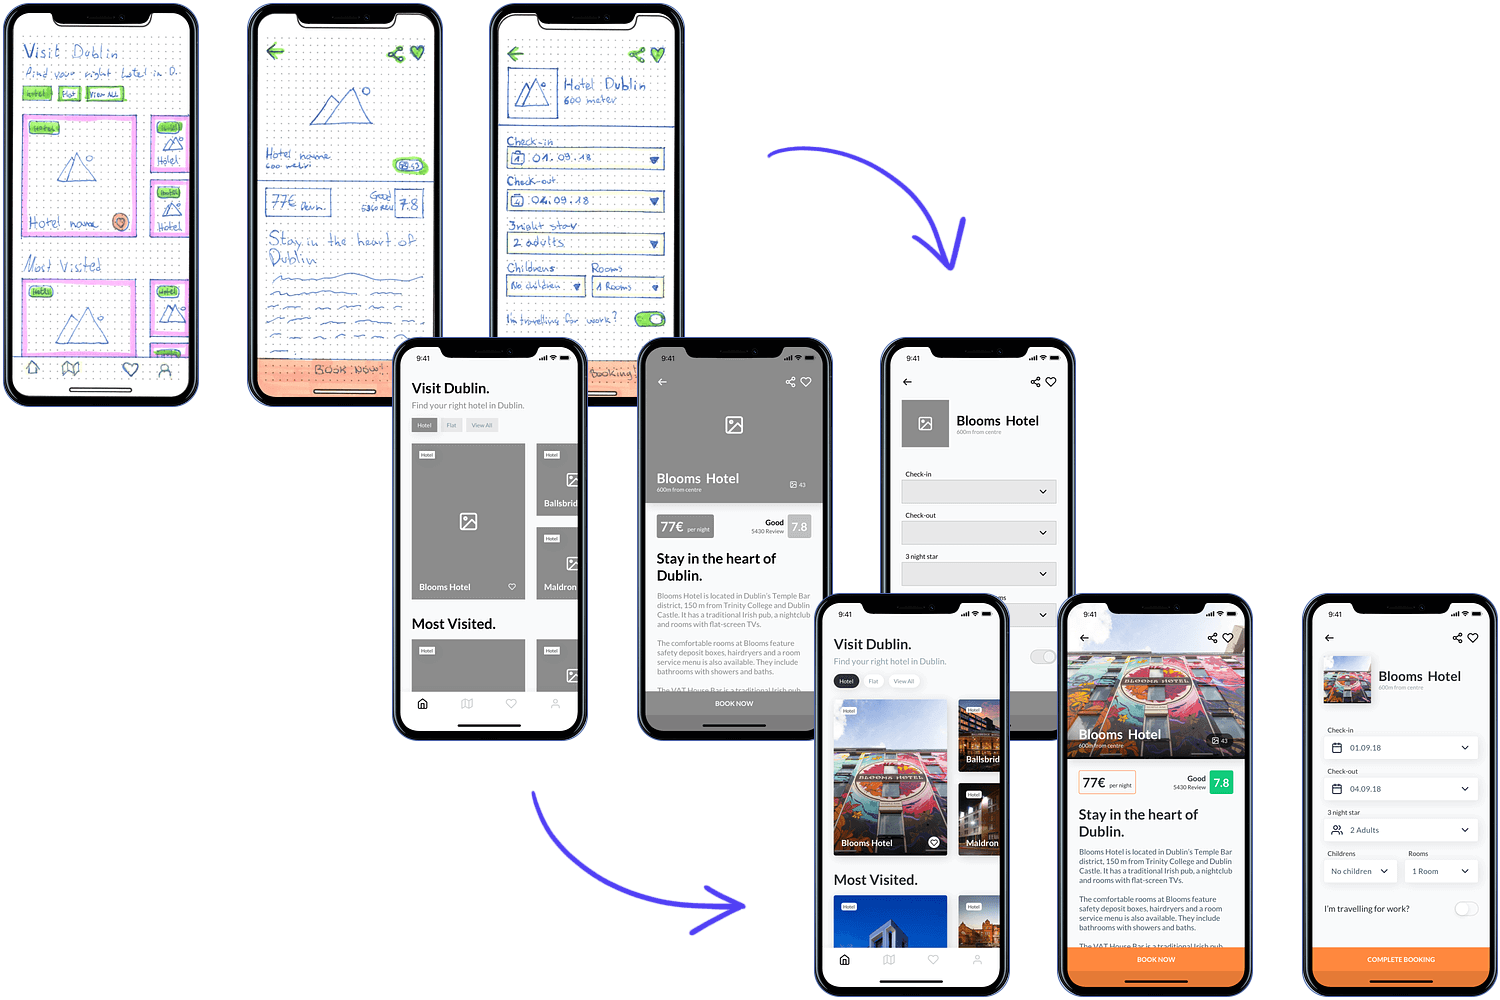 Sketches of a mobile app interface showing menu navigation, user profile, and profile verification pages.